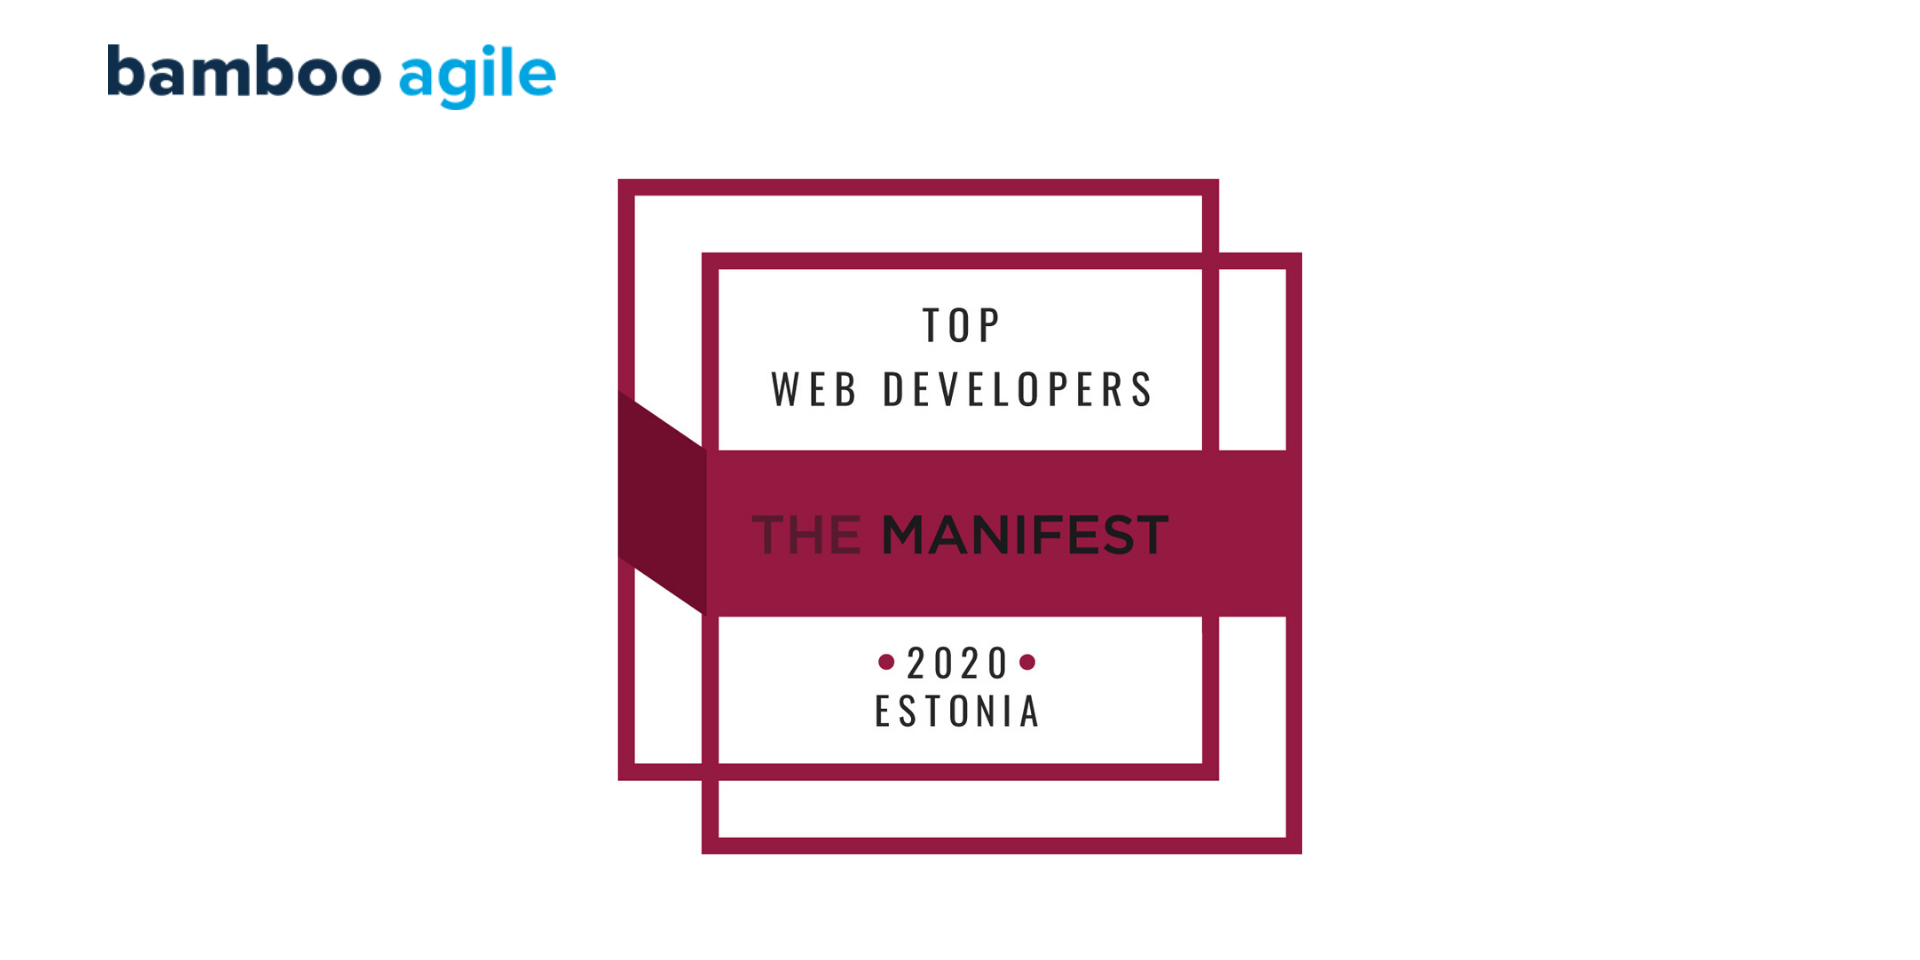 Bamboo Agile recognized among top web developers in estonia